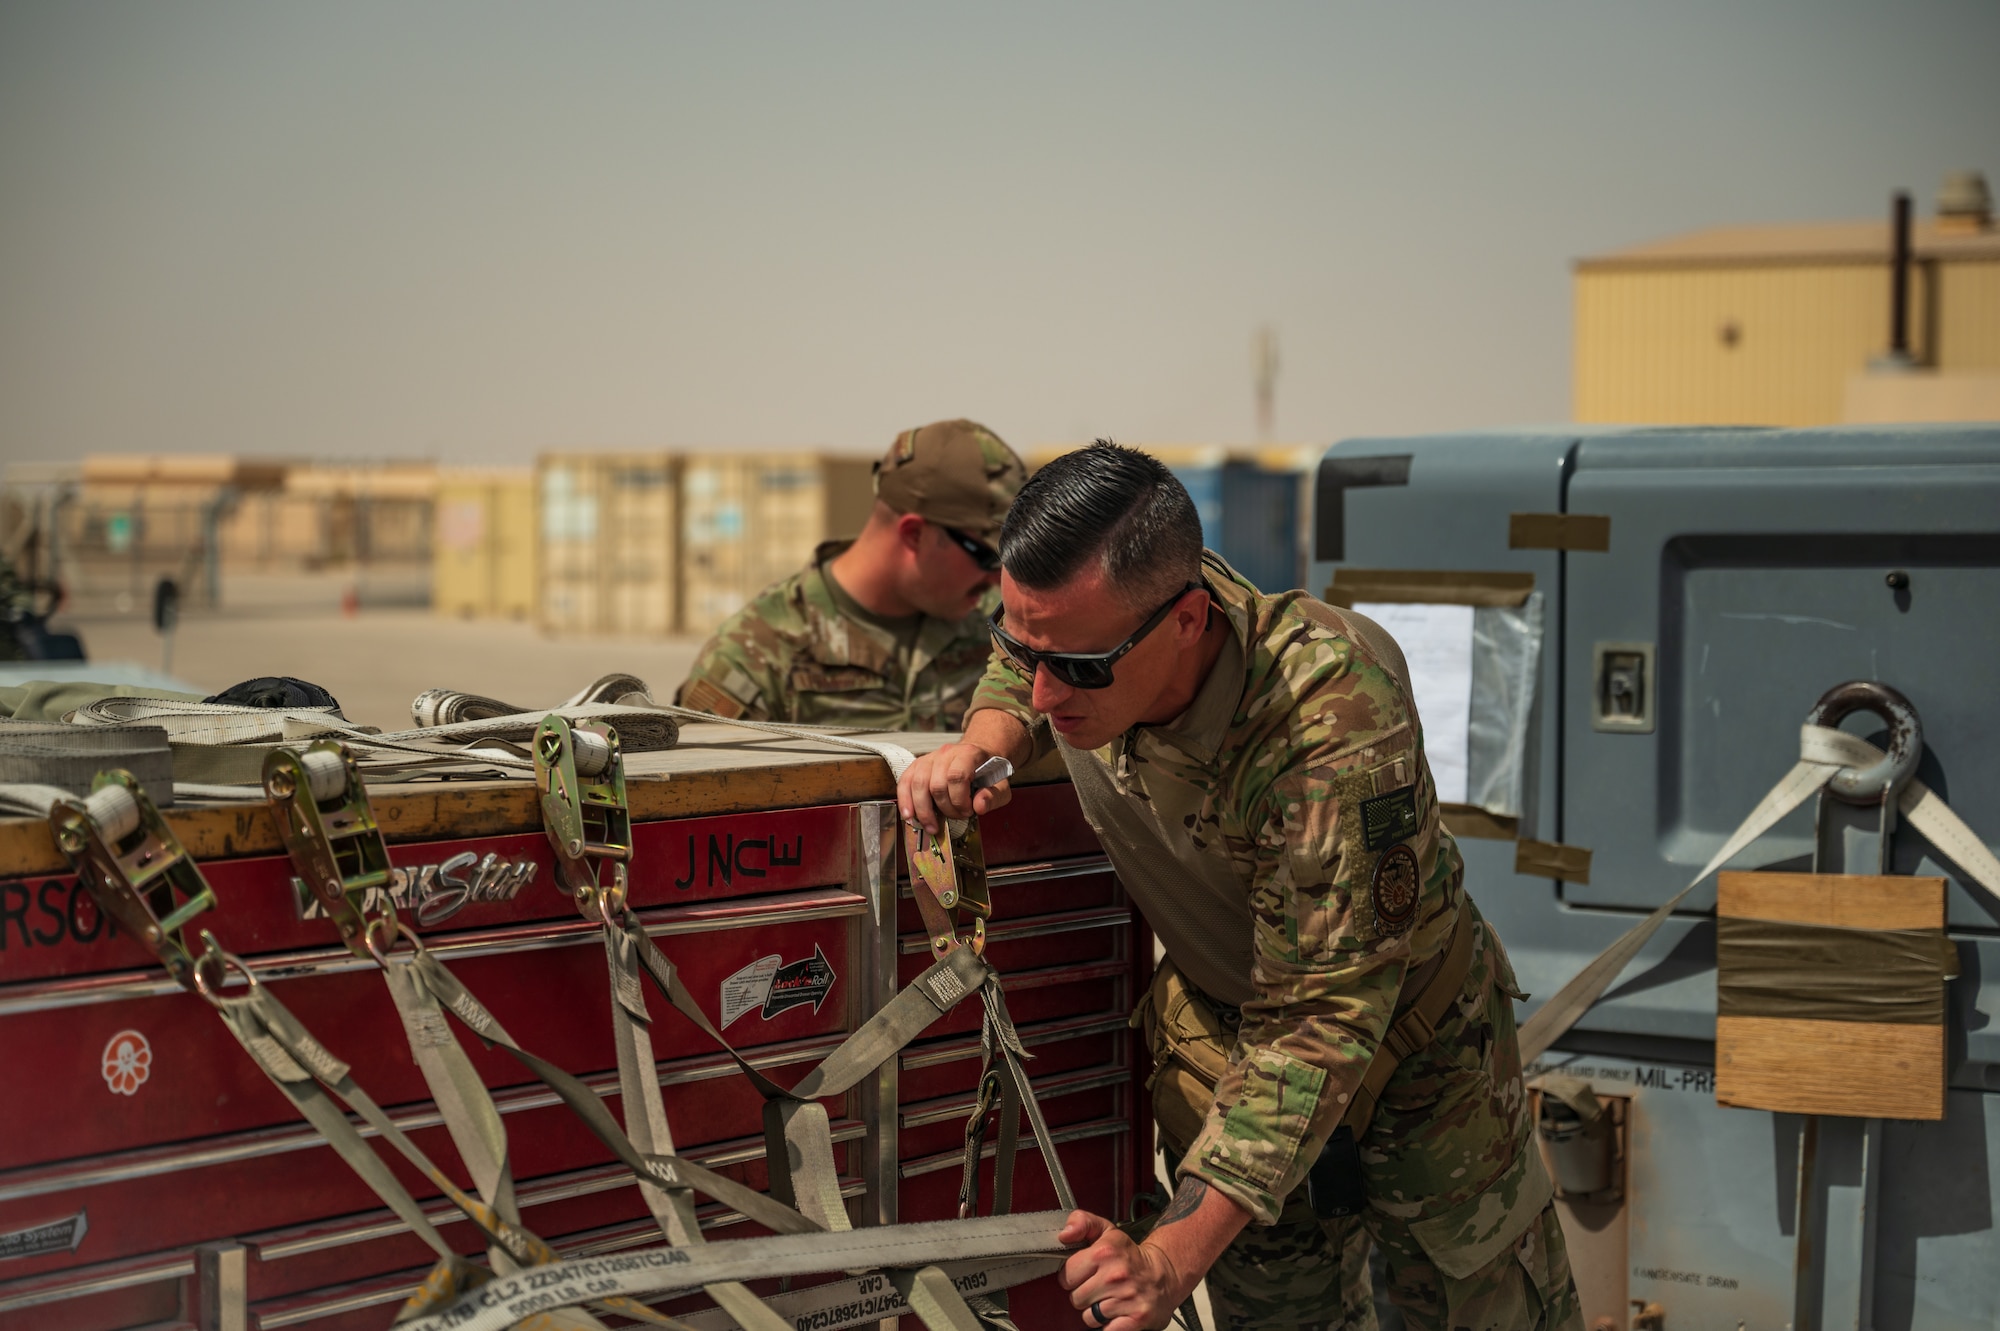 U.S. Air Force Tech Sgt. Cory Tracy, forward deployed from the 387th Air Expeditionary Squadron, Ali Al Salem Air Base, Kuwait, inspects cargo in preparation for a departure flight during Accurate Test 22 at Thumrait Air Base, Oman, May 22, 2022. The inspection helped ensure that the cargo was safe, secure and properly marked for shipment. (U.S. Air Force photo by Staff Sgt. Dana Tourtellotte)